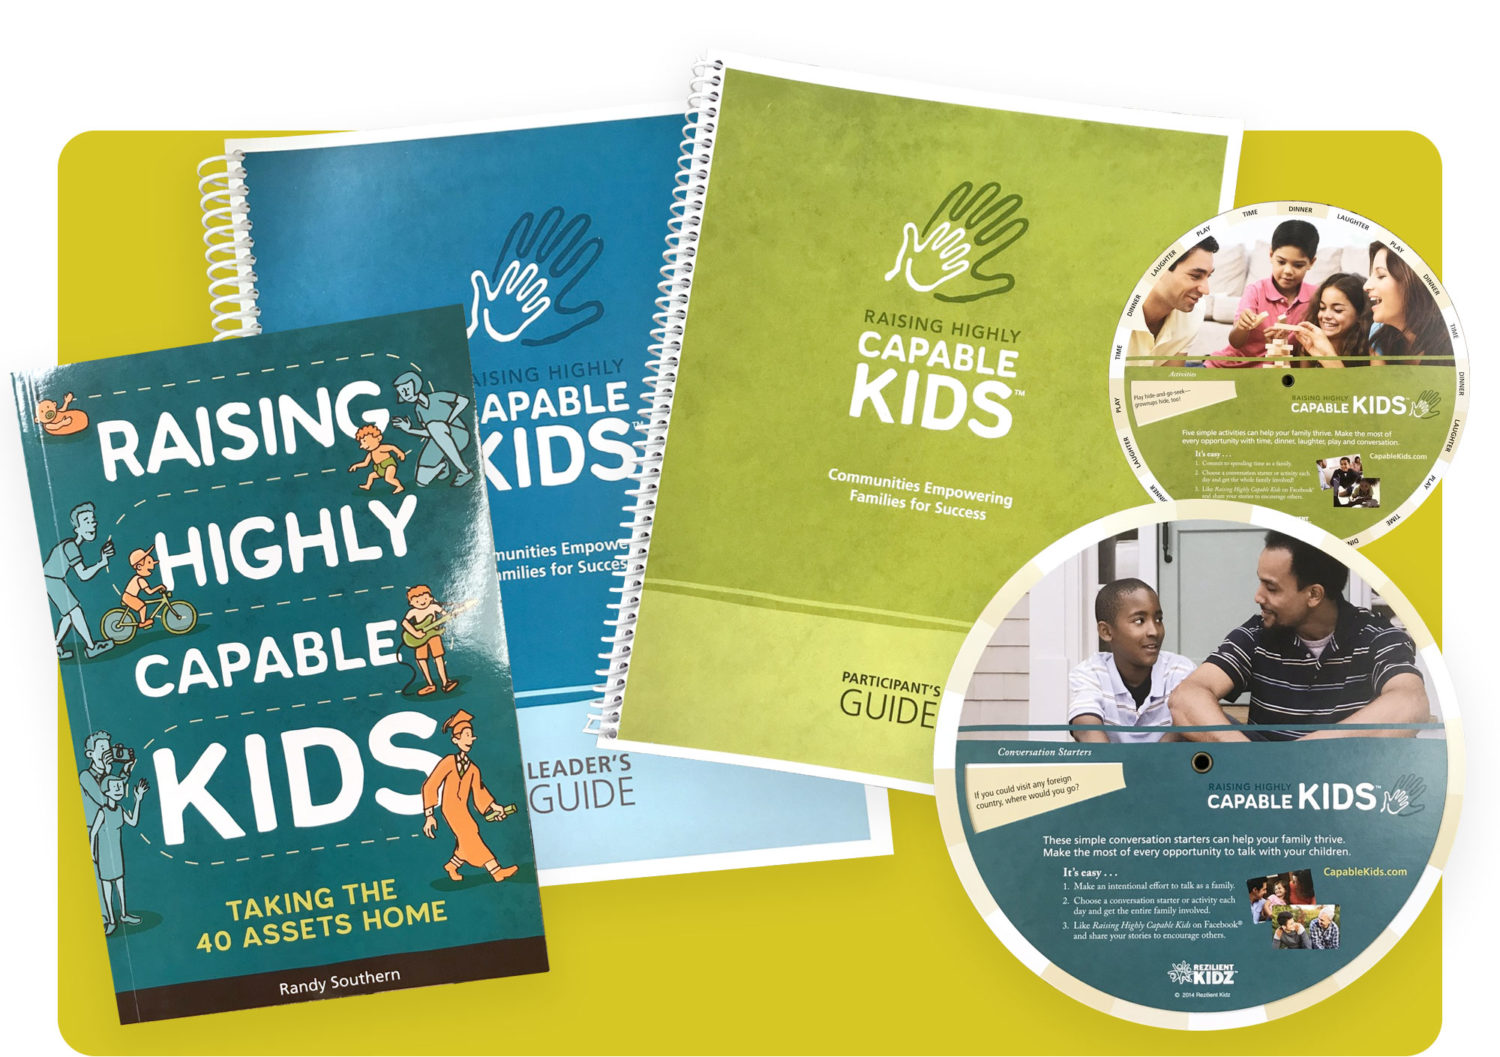 Program training guides, book, and activity wheel.